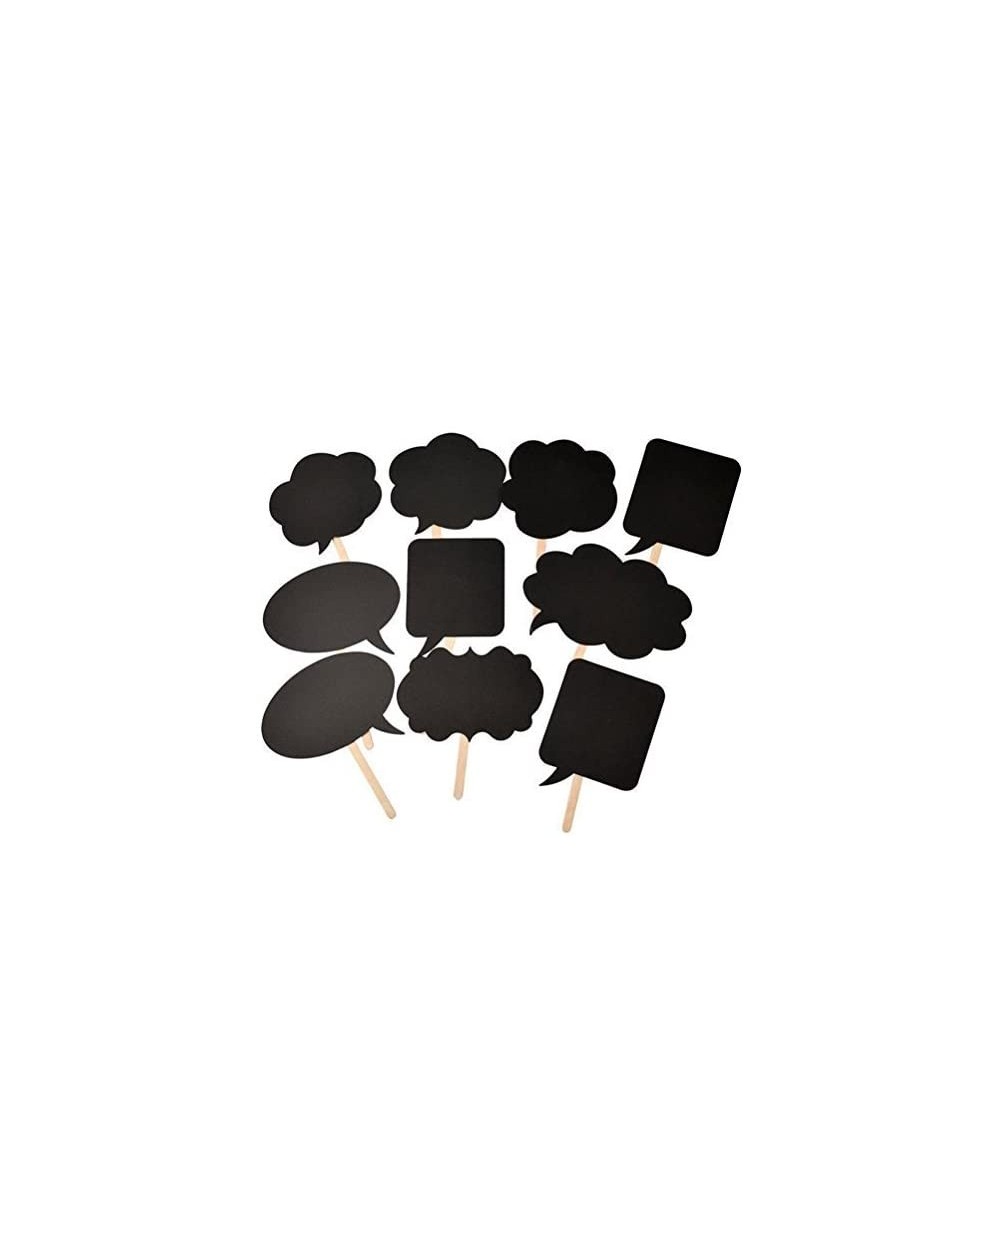 Photobooth Props Photo Booth Kit-Writable Black Card Board Photographing Props Party Favor(10pcs Different Shapes)- style 1 -...